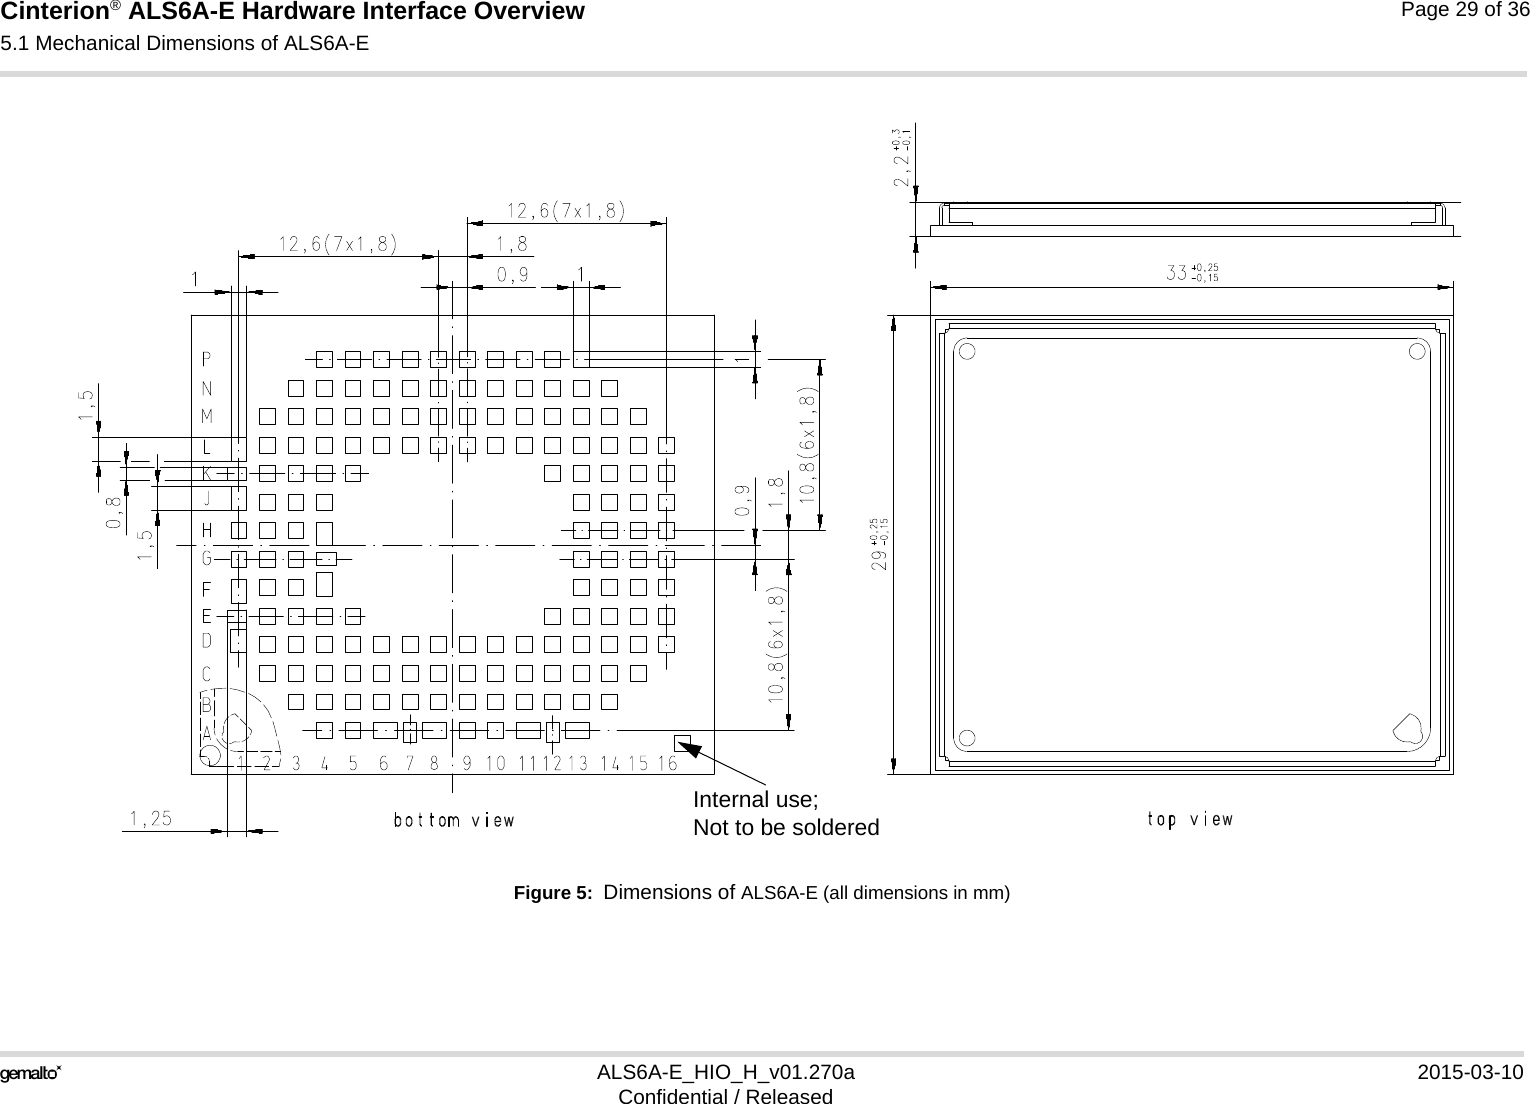 Cinterion® ALS6A-E Hardware Interface Overview5.1 Mechanical Dimensions of ALS6A-E29ALS6A-E_HIO_H_v01.270a 2015-03-10Confidential / ReleasedPage 29 of 36Figure 5:  Dimensions of ALS6A-E (all dimensions in mm)Internal use; Not to be soldered